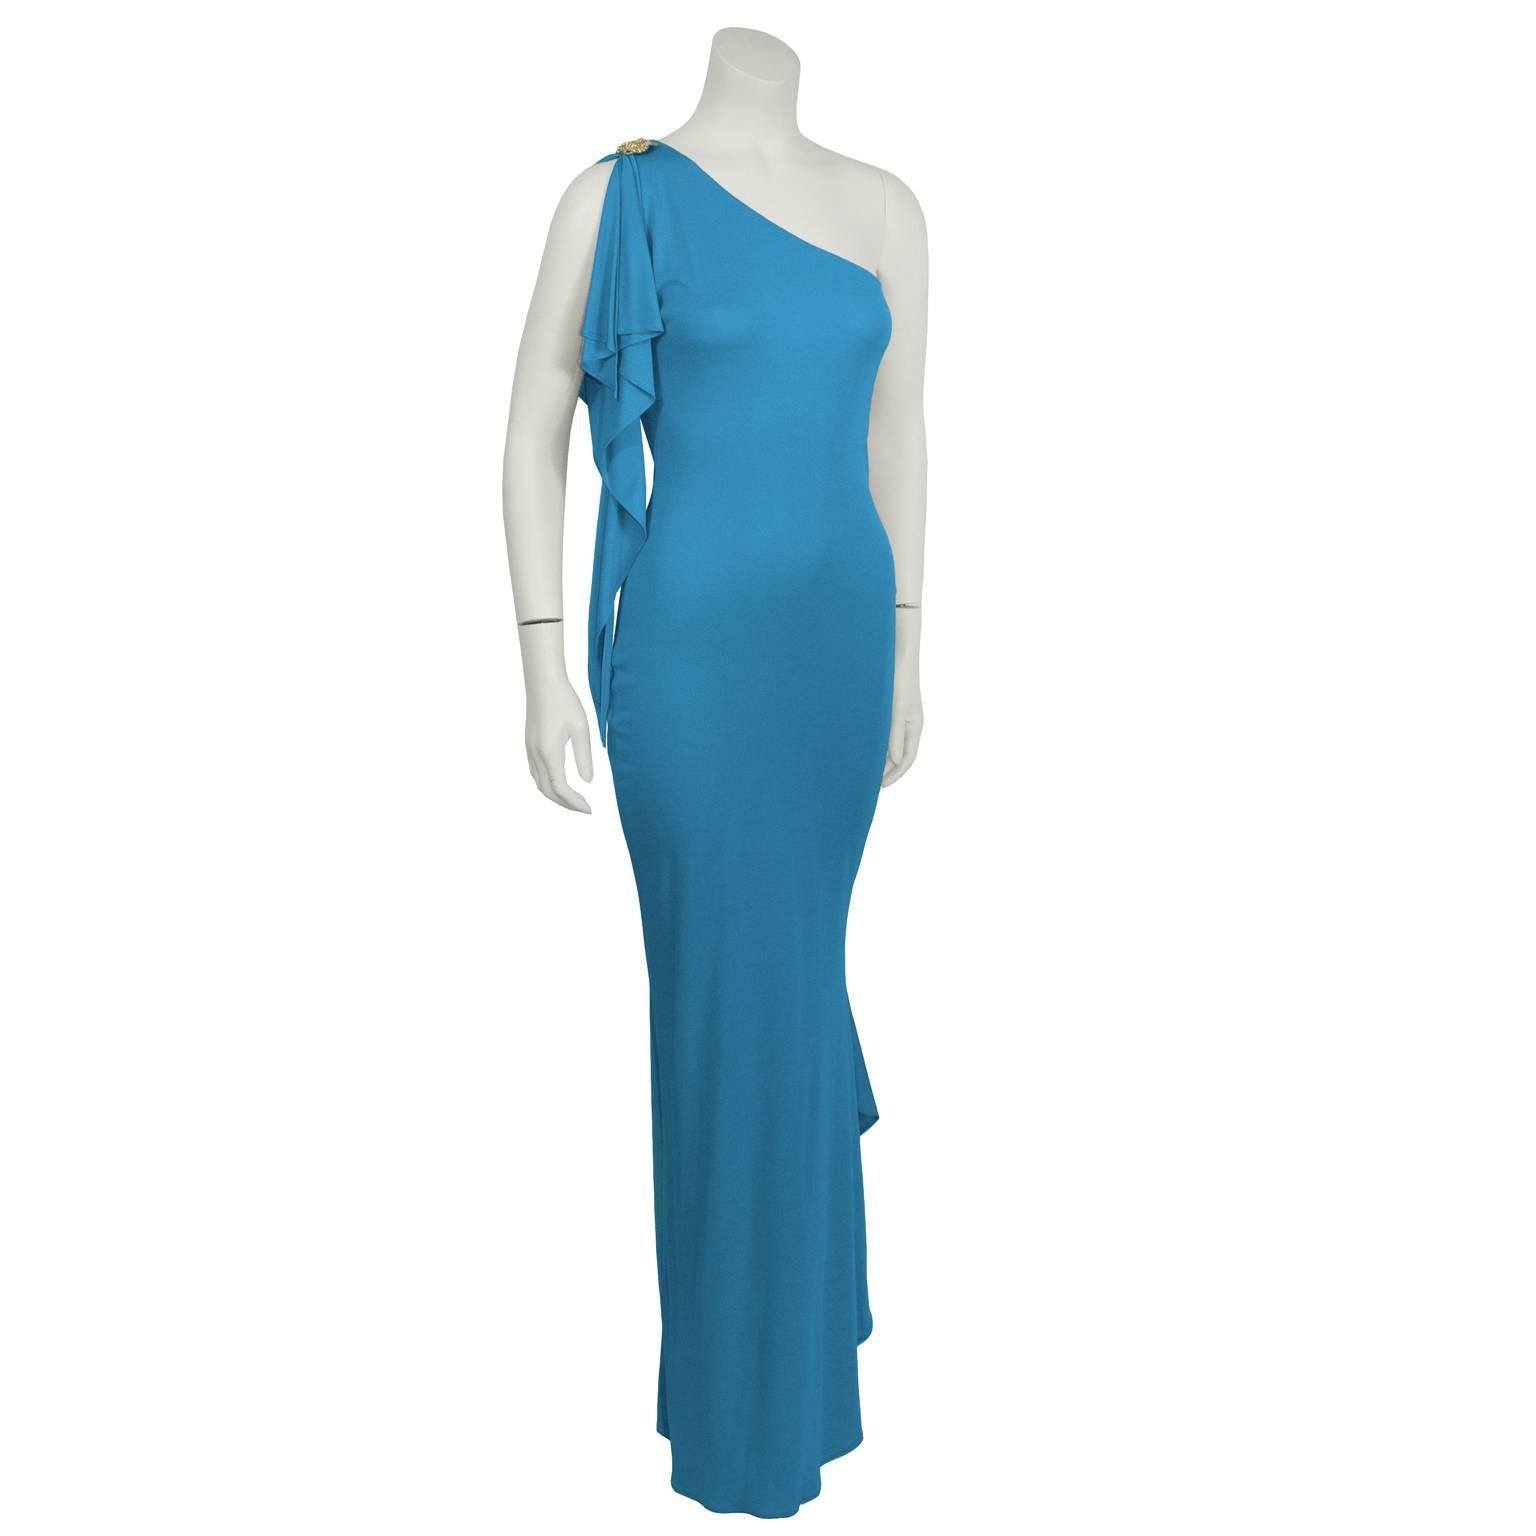 Stunning Marc Bouwer one-shoulder gown from the 2000's is a vibrant blue, with a rhinestone pin on the shoulder. Mermaid fit, with an elegant cascading tail. Side zip closure. Excellent vintage condition. 

Length 58.5